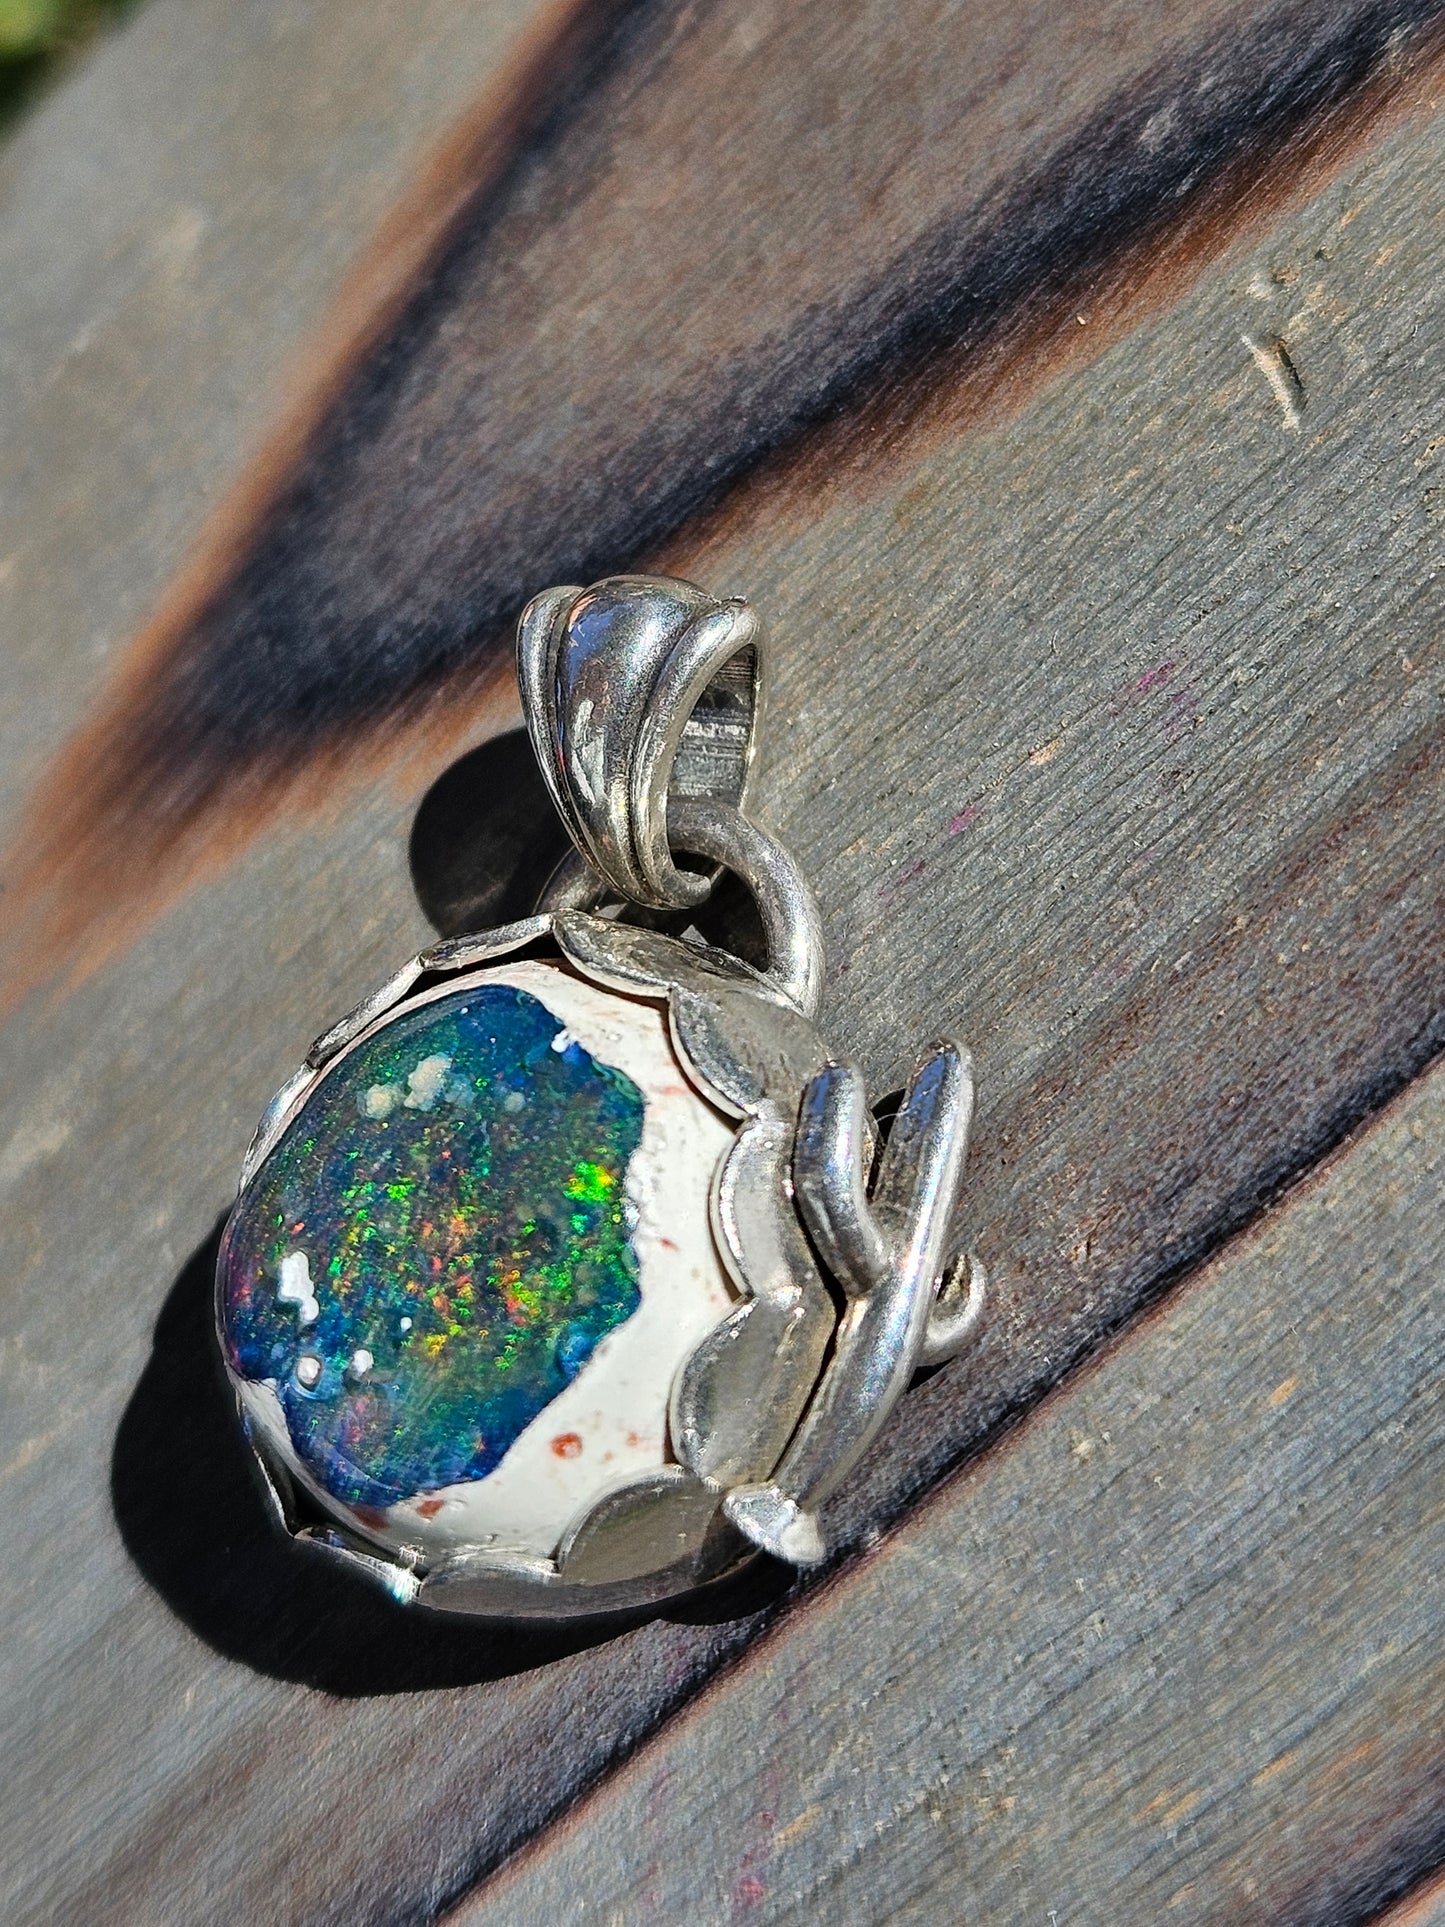 "Desert" Mexican Galaxy Opal and Cactus Pendant